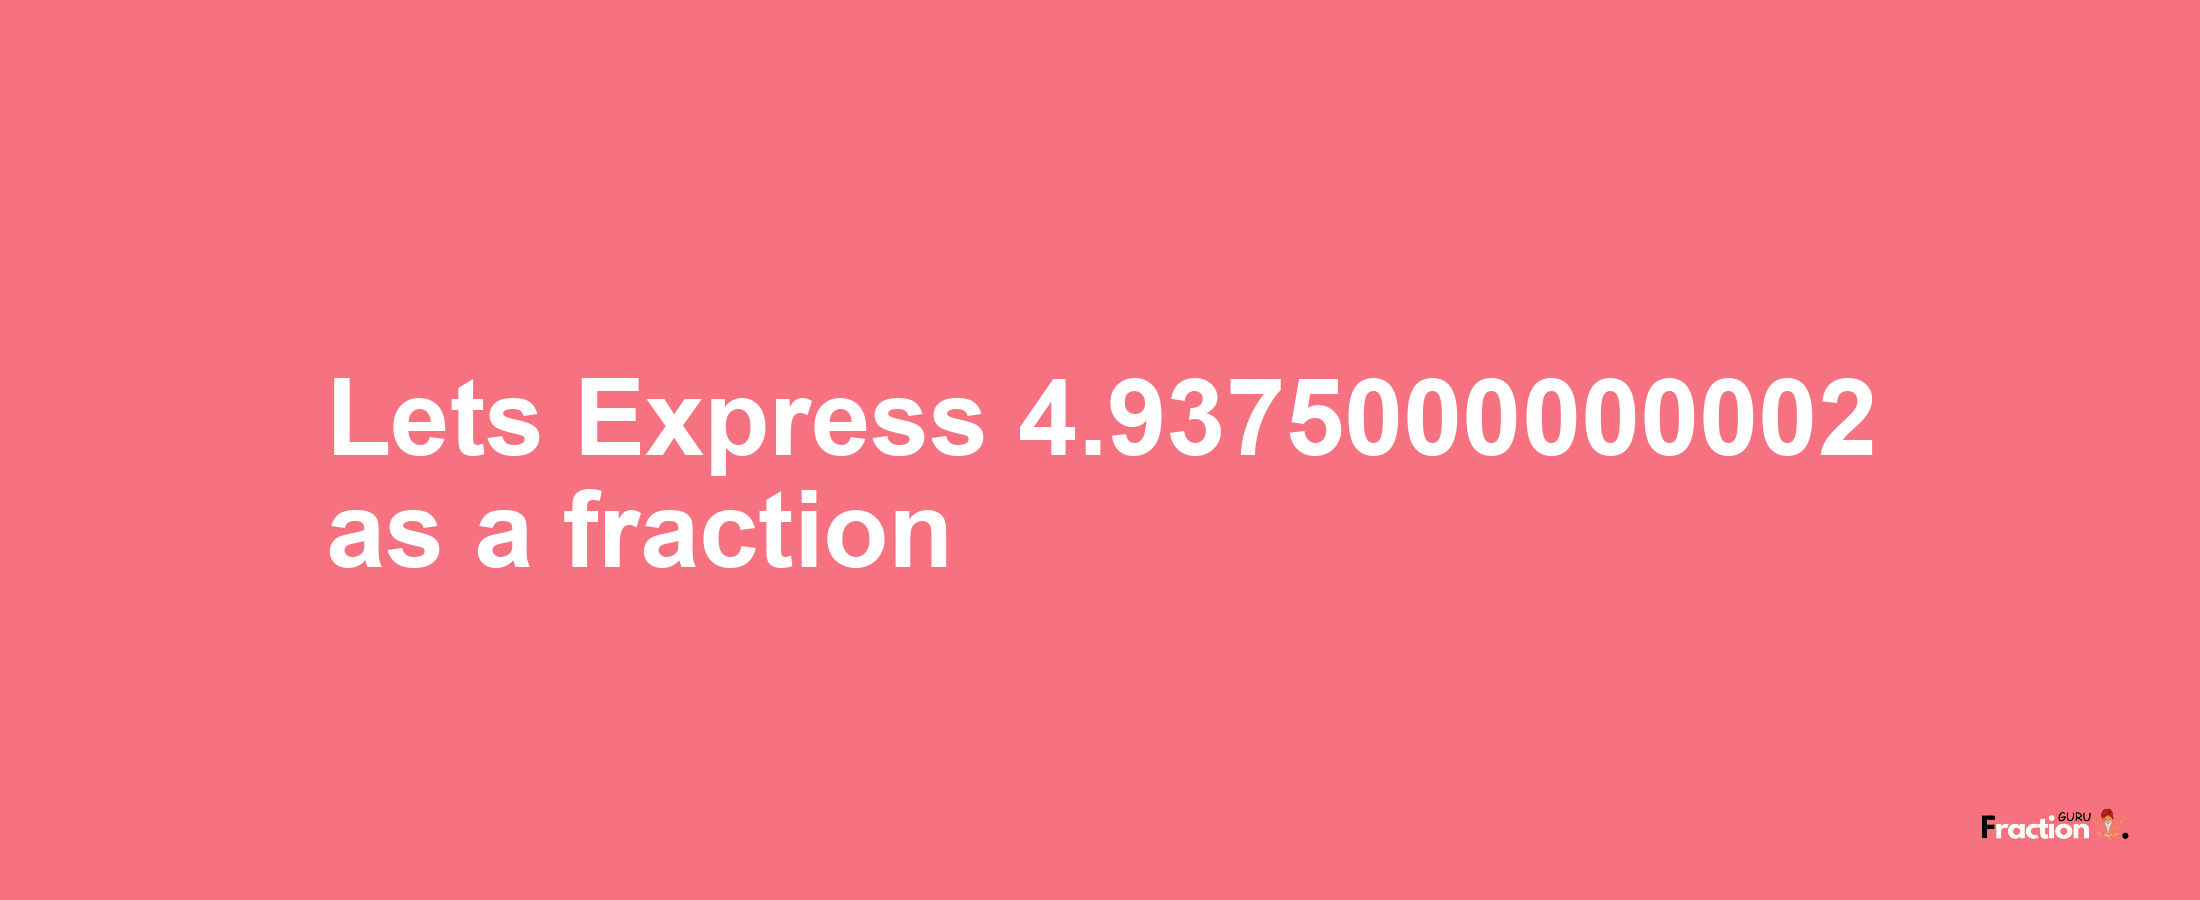 Lets Express 4.9375000000002 as afraction